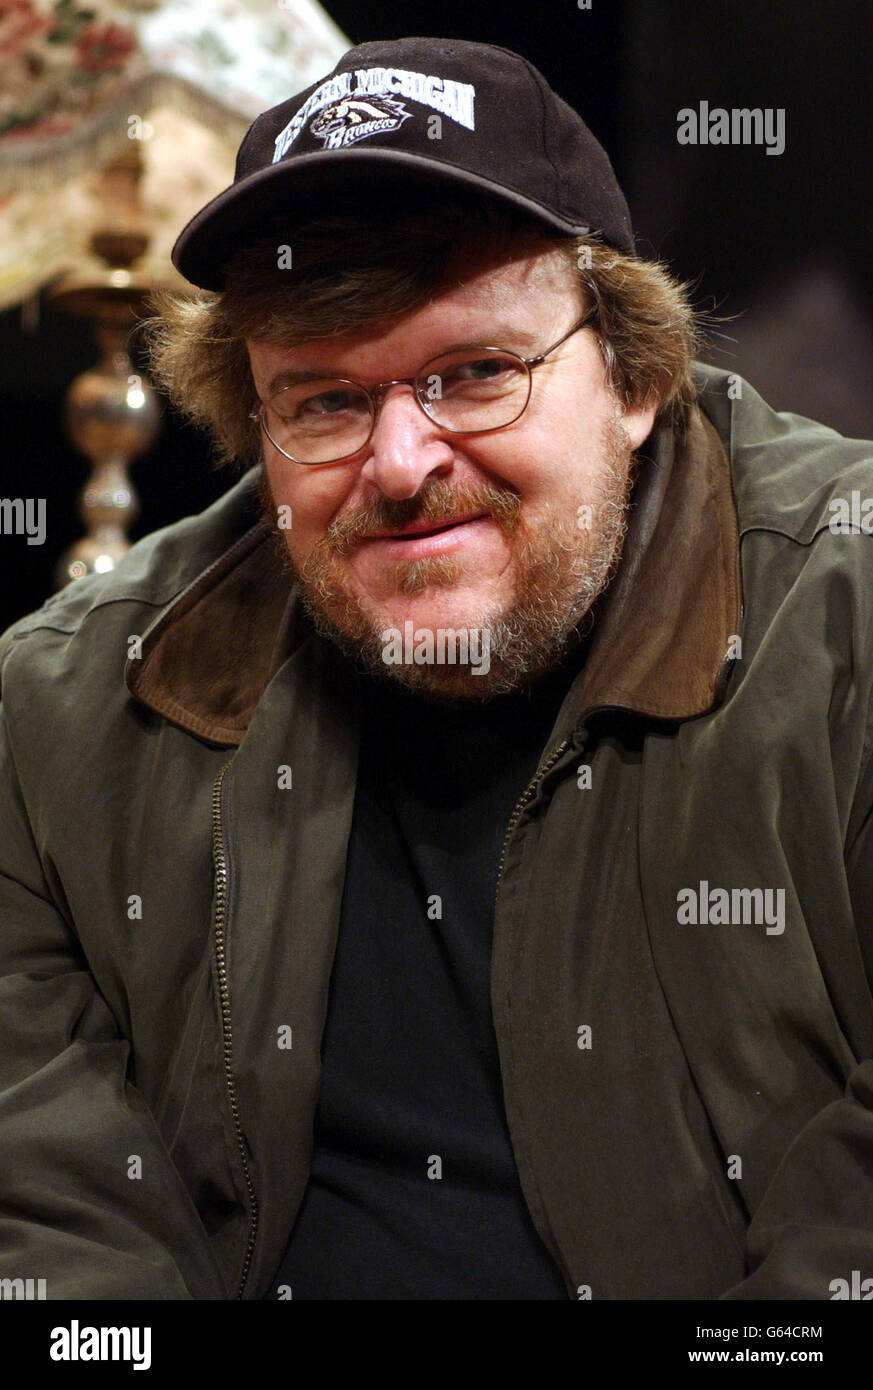 American film and documentary maker and author Michael Moore at the Roundhouse Theatre in London for a photocall to promote his new show 'Michael Moore Live!' * Which is described as a platform for the expression of revolting opinions about America's polictical and legislative systems. Stock Photo